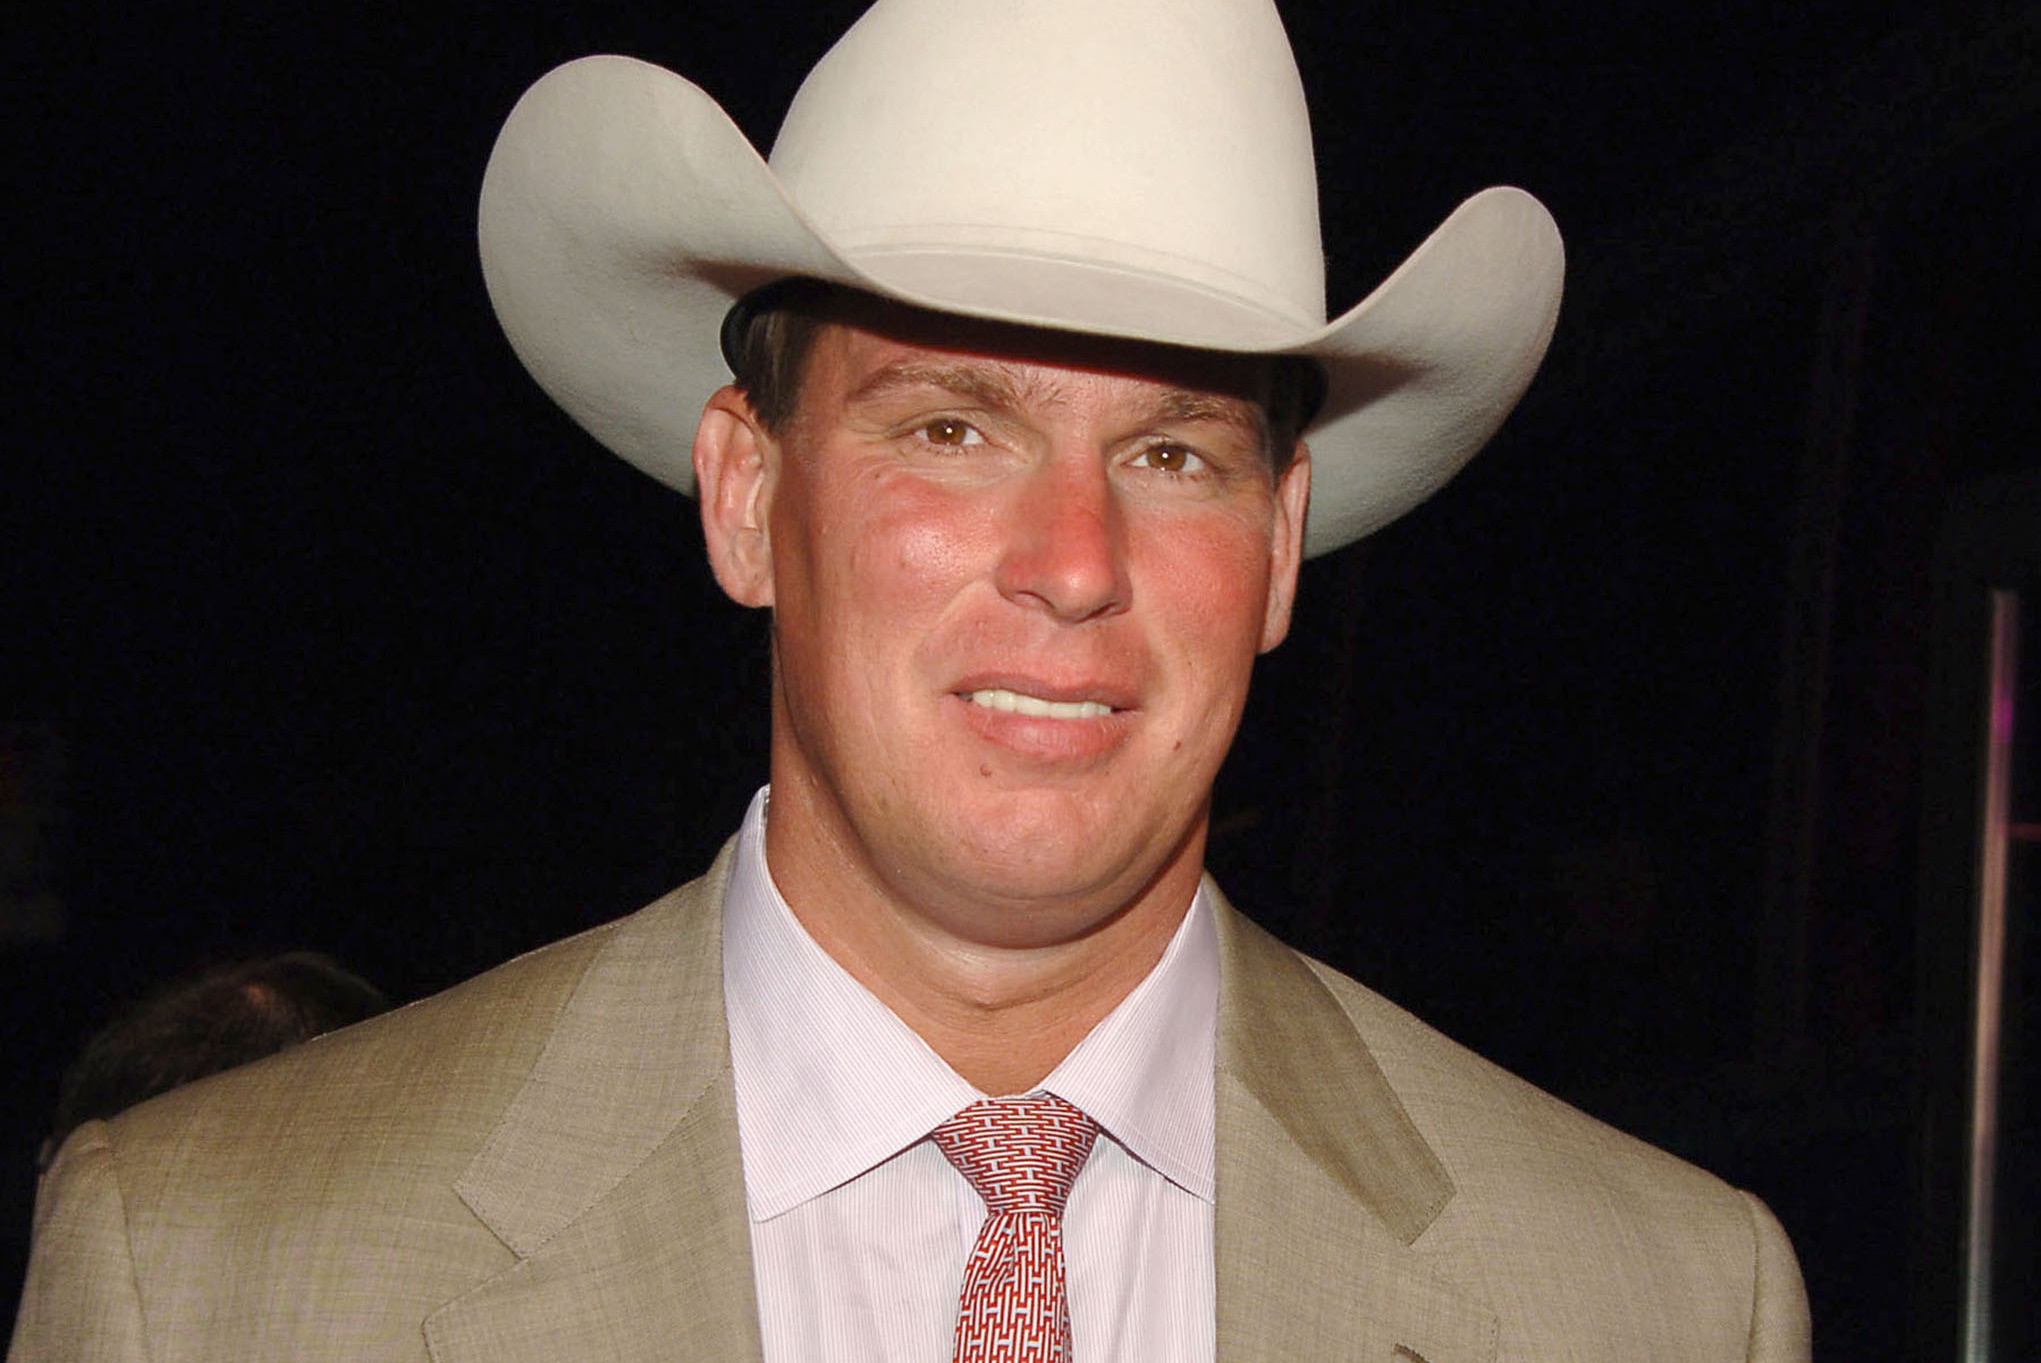 WWE: JBL Reflects Historic and Incredible Journey Ahead | Scores, Highlights, Stats, and Rumors | Bleacher Report